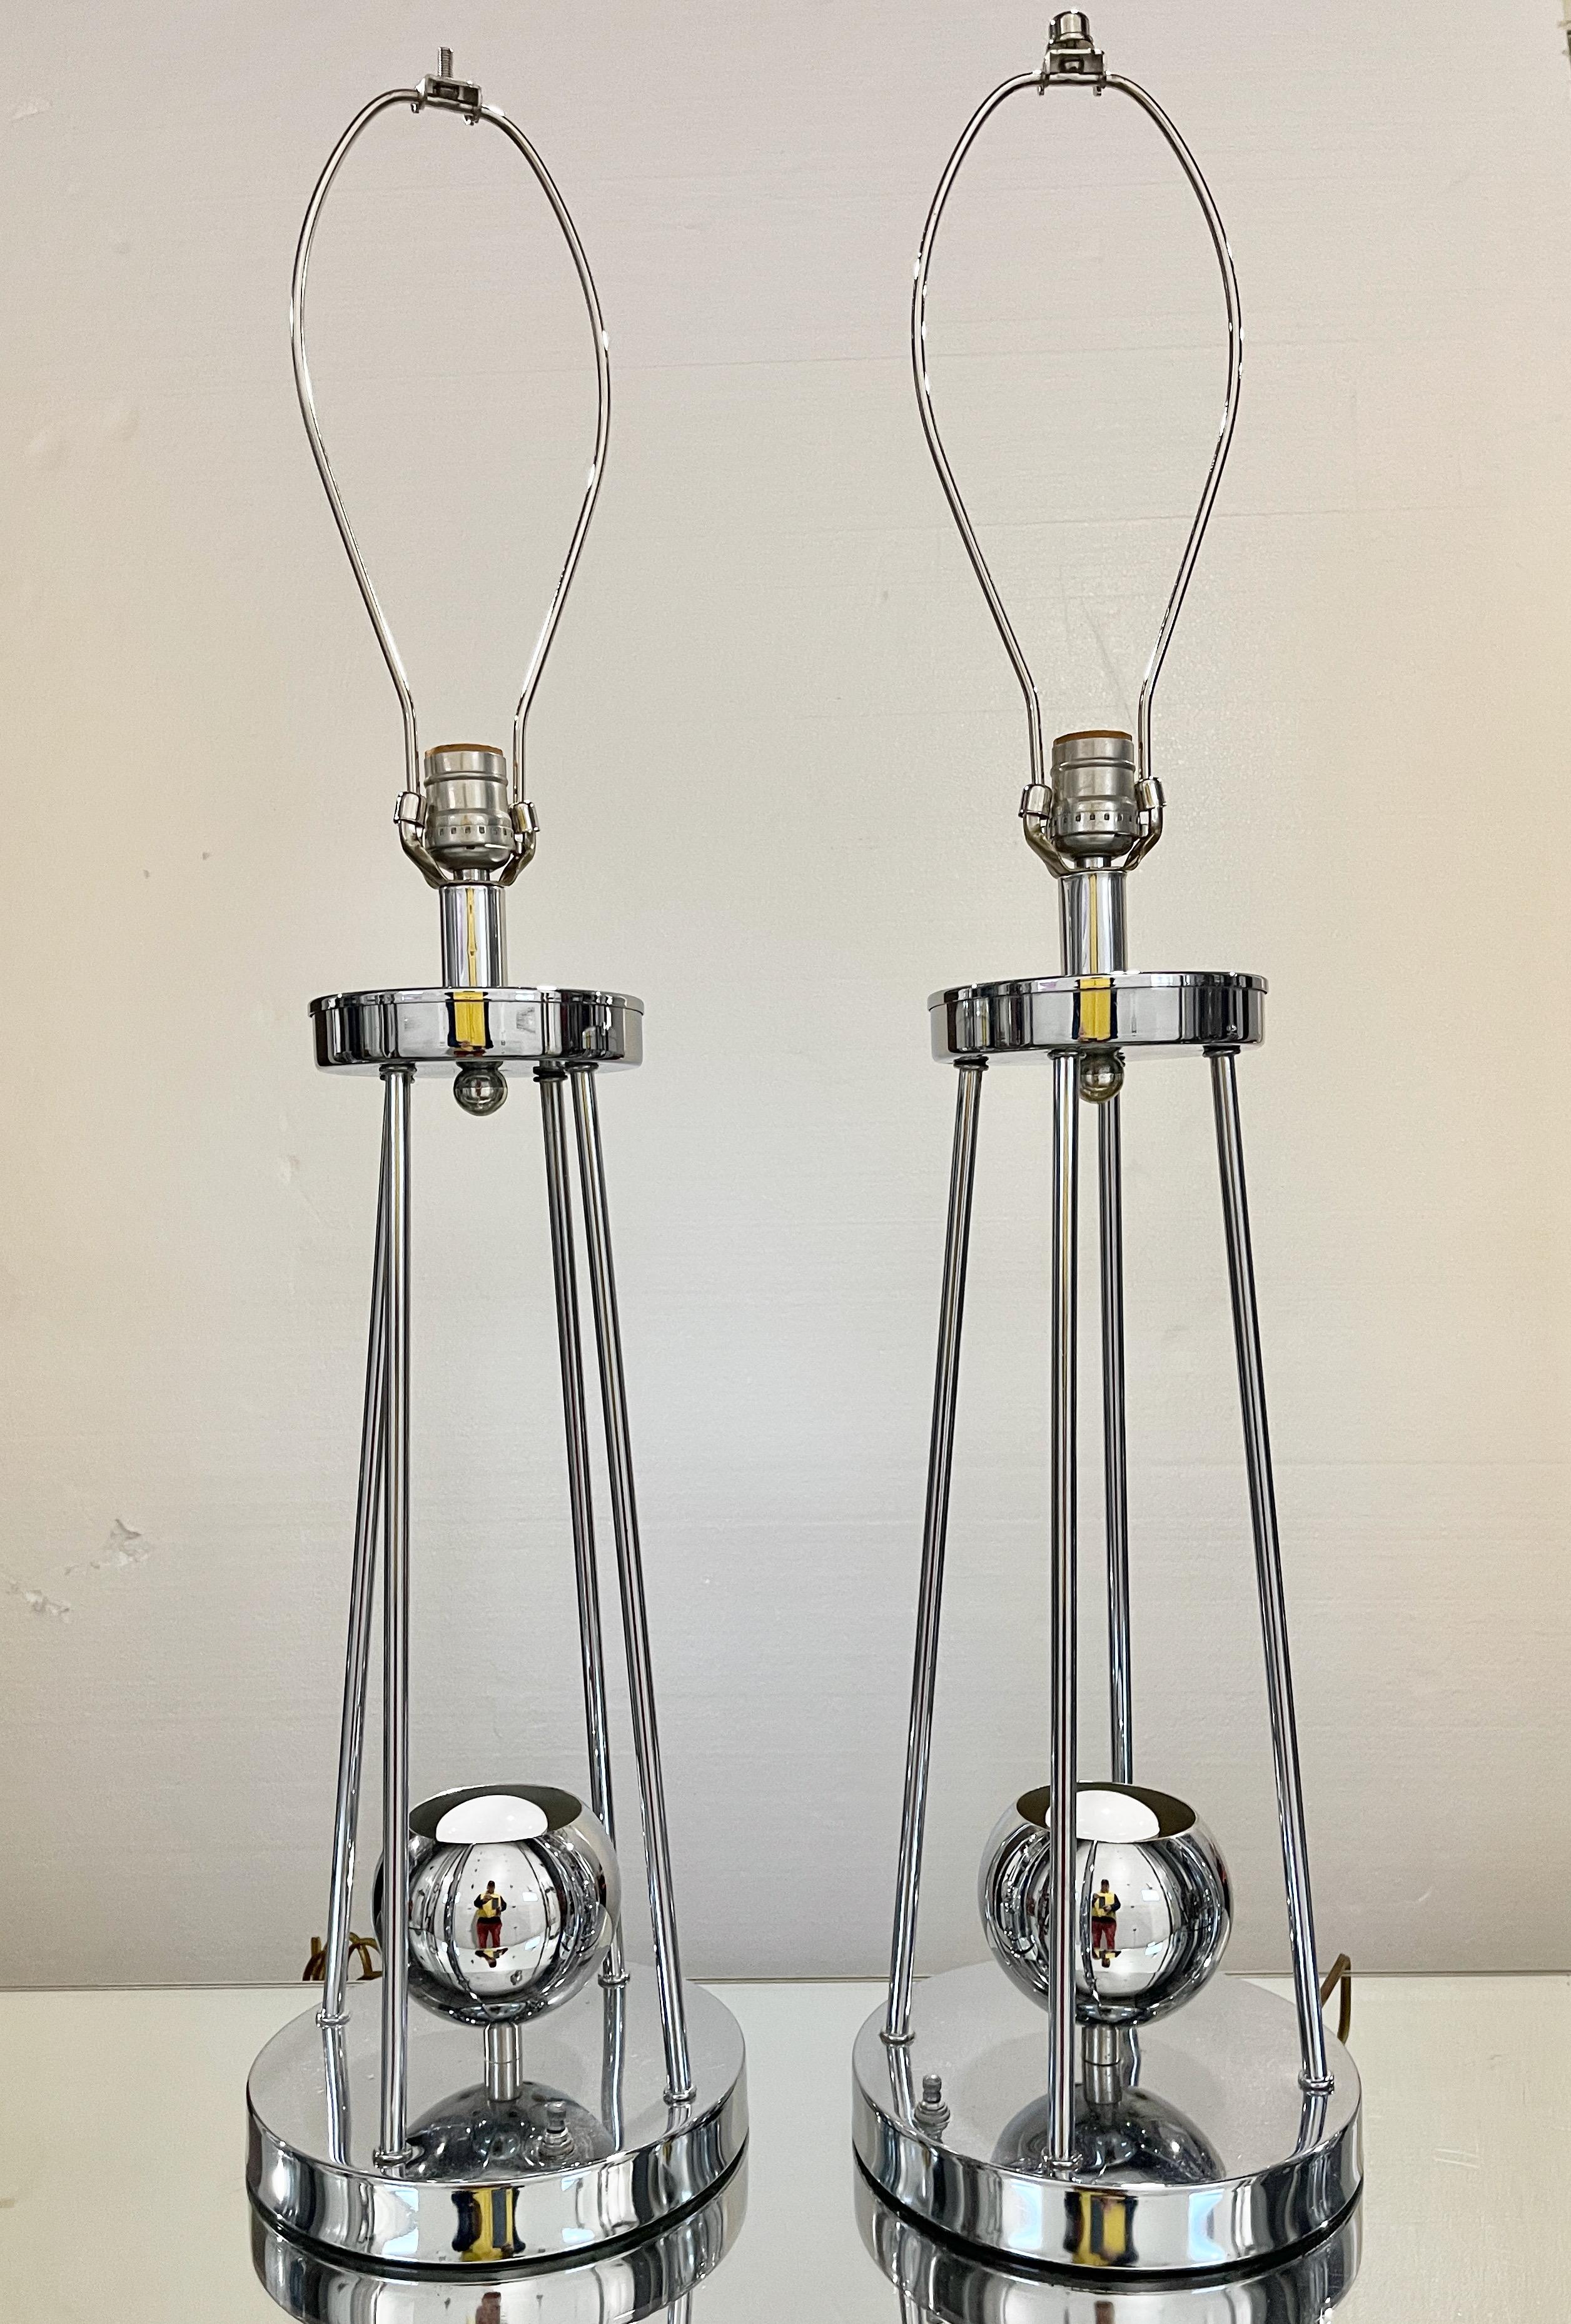 Pair of 1970's space age atomic chrome table lamps with both a upper standard edison screw lightbulb and a lower chrome eyeball in which you can use either a small spot/flood light bulb or a chrome top lightbulb. Switch on base allows independent